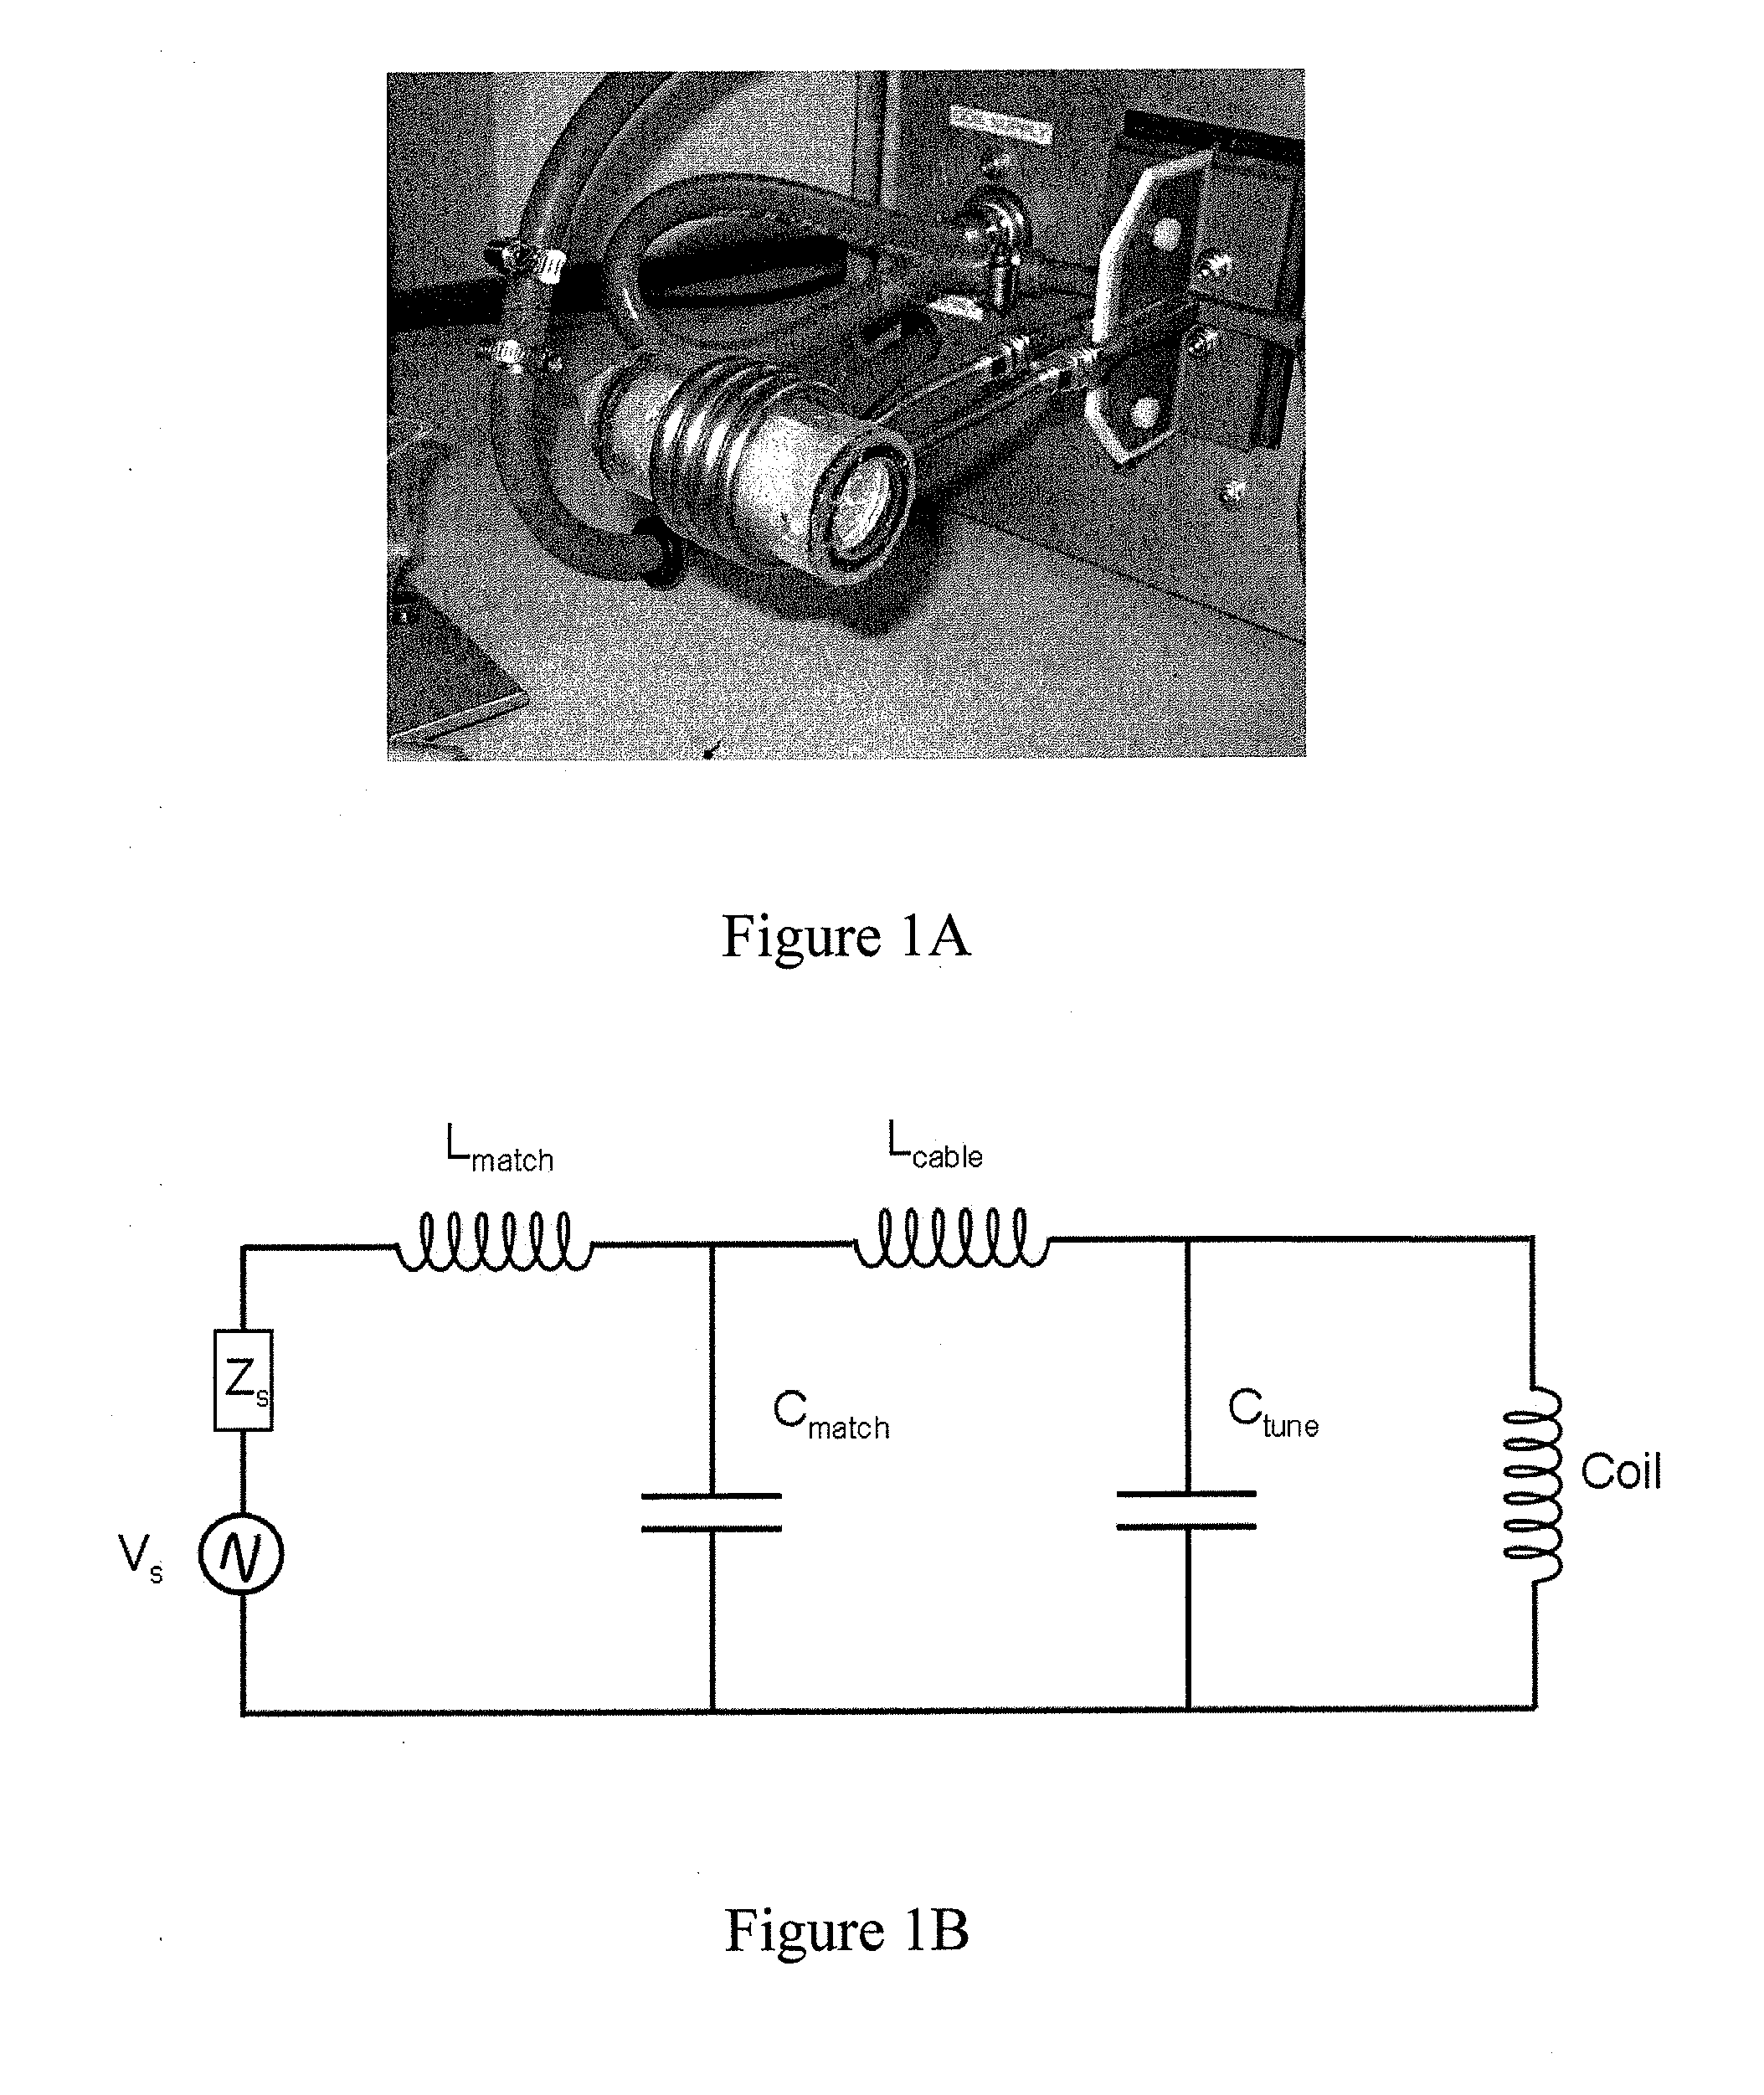 Systems and Methods to Reduce Power Deposition in Tissue Exposed to Radio Frequency Electromagnetic Fields